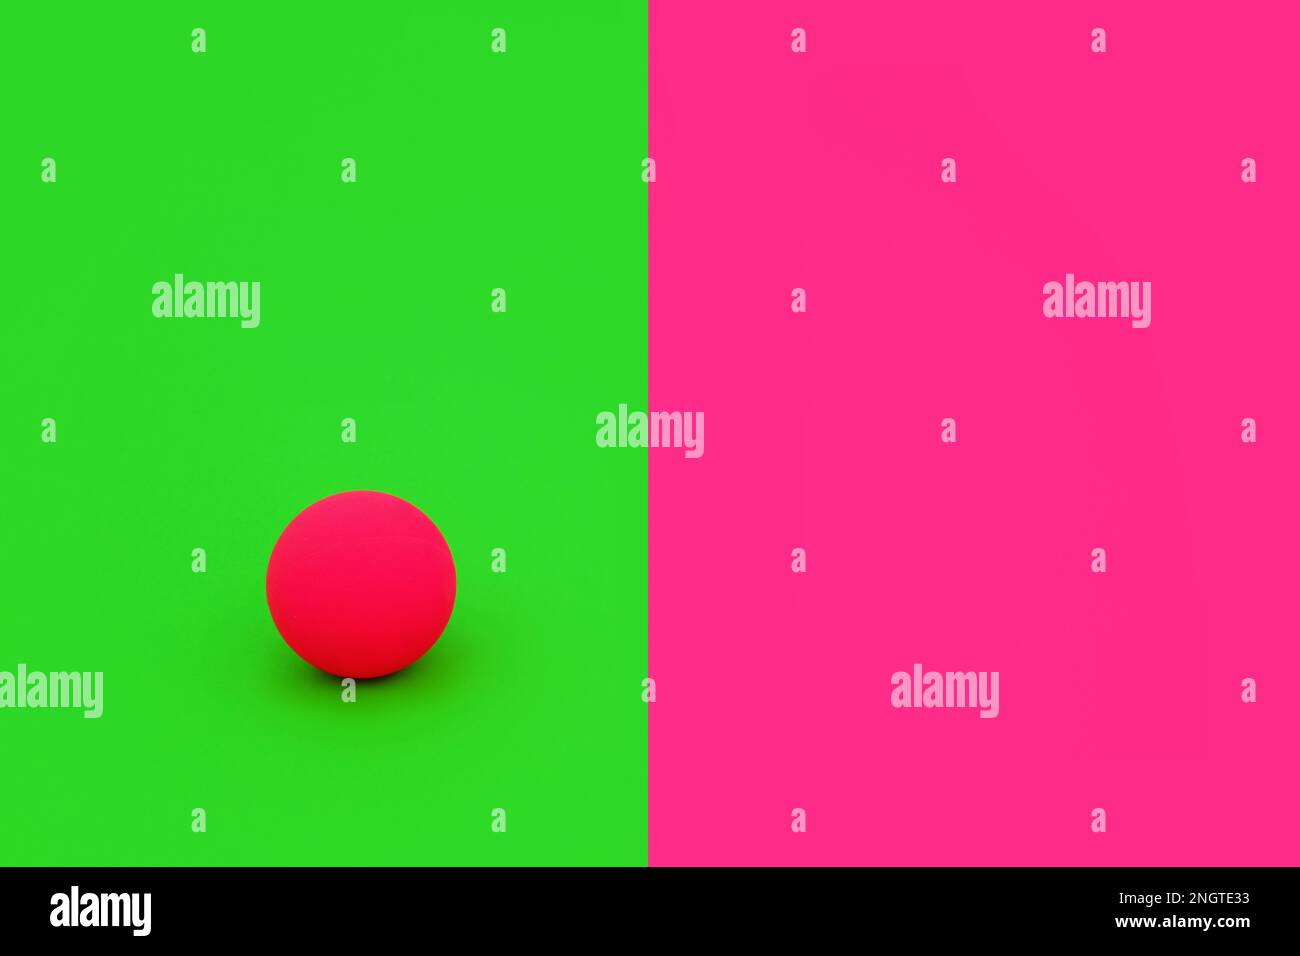 Dare to be different and independent concept with vivid green and pink contrast background with ball. Minimal solitary, alone, leadership, concept. Stock Photo